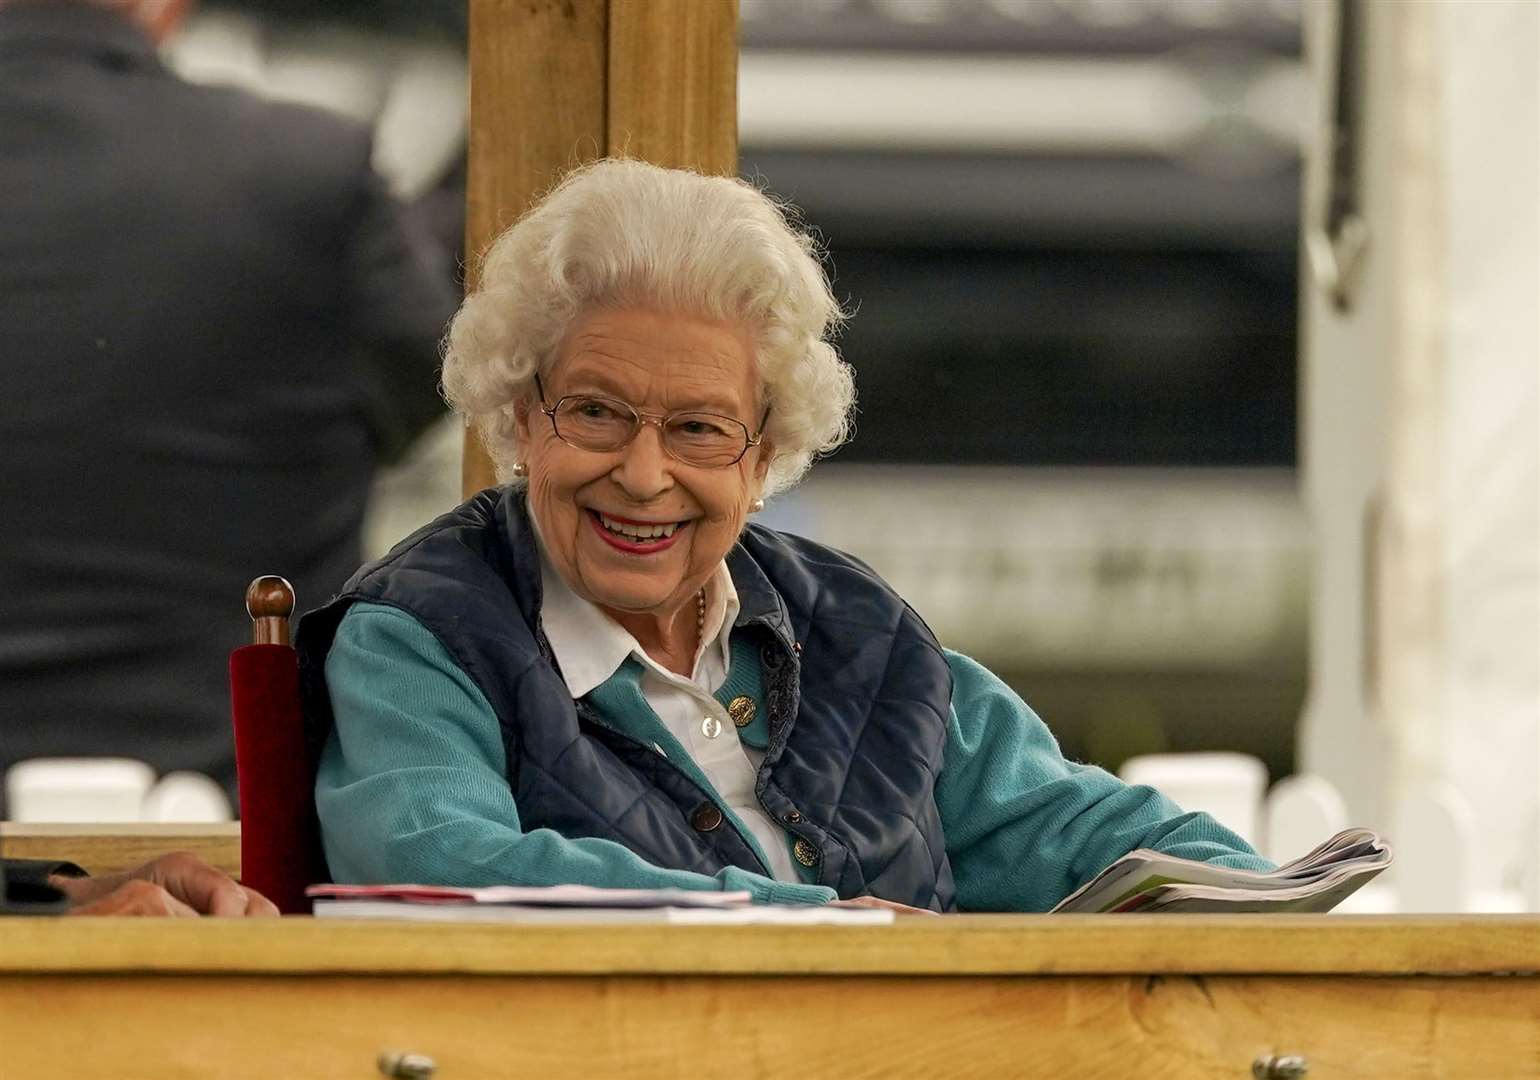 The Queen at the Royal Windsor Horse Show in July 2021 (Steve Parsons/PA)